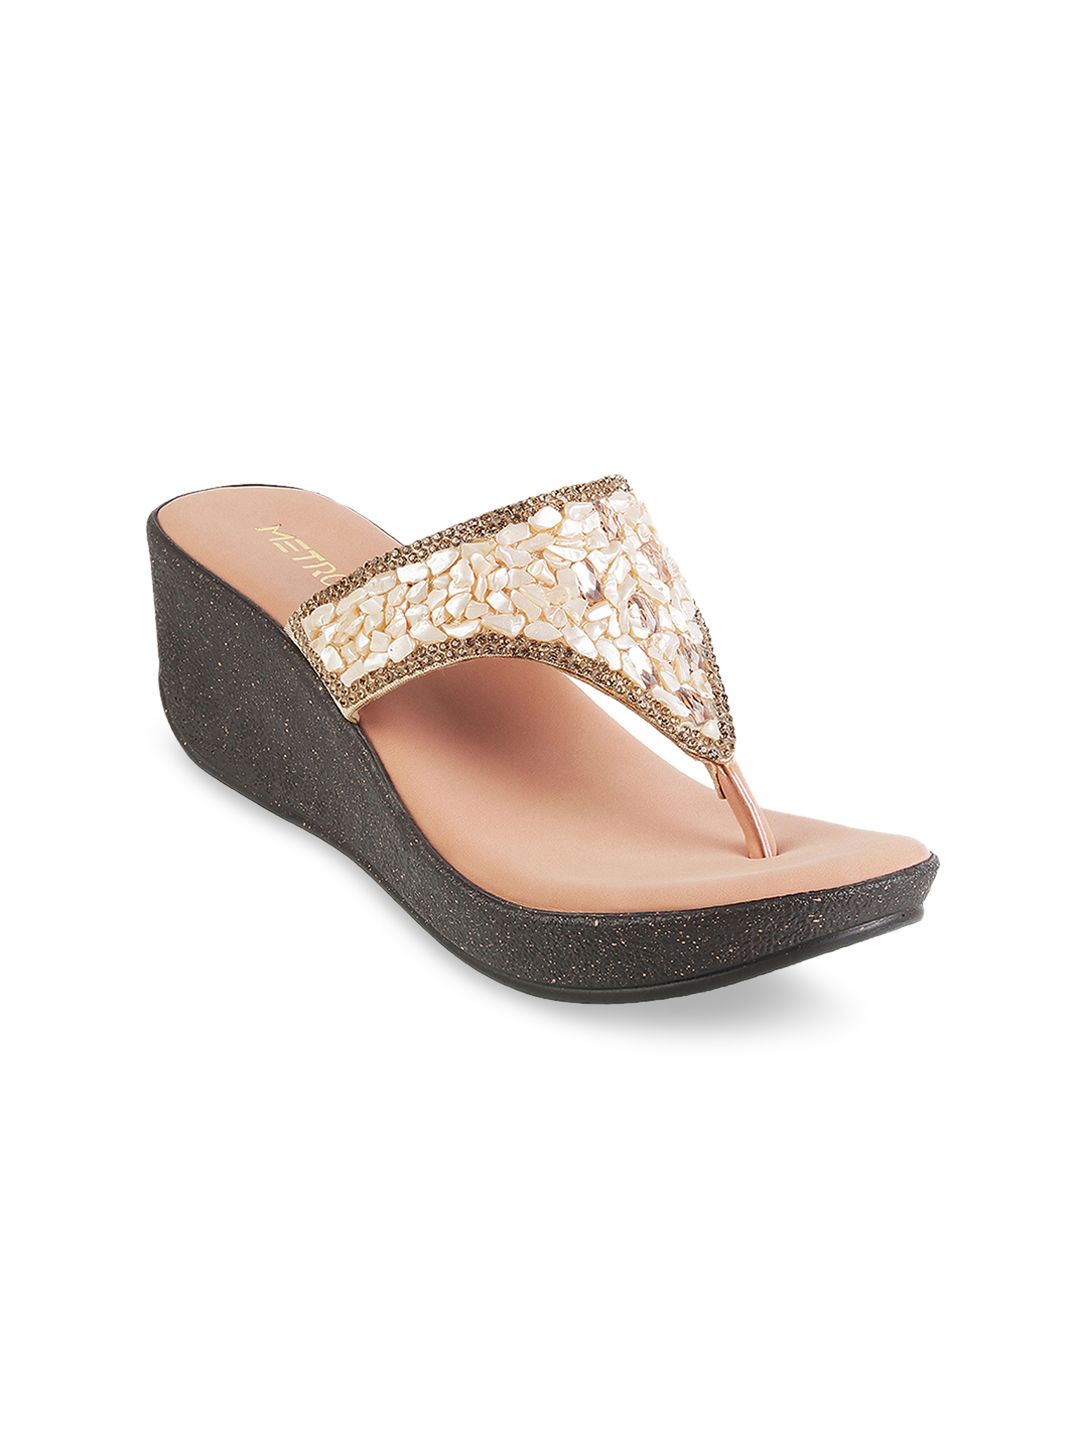 Metro Women Peach-Coloured Embellished Wedges Price in India